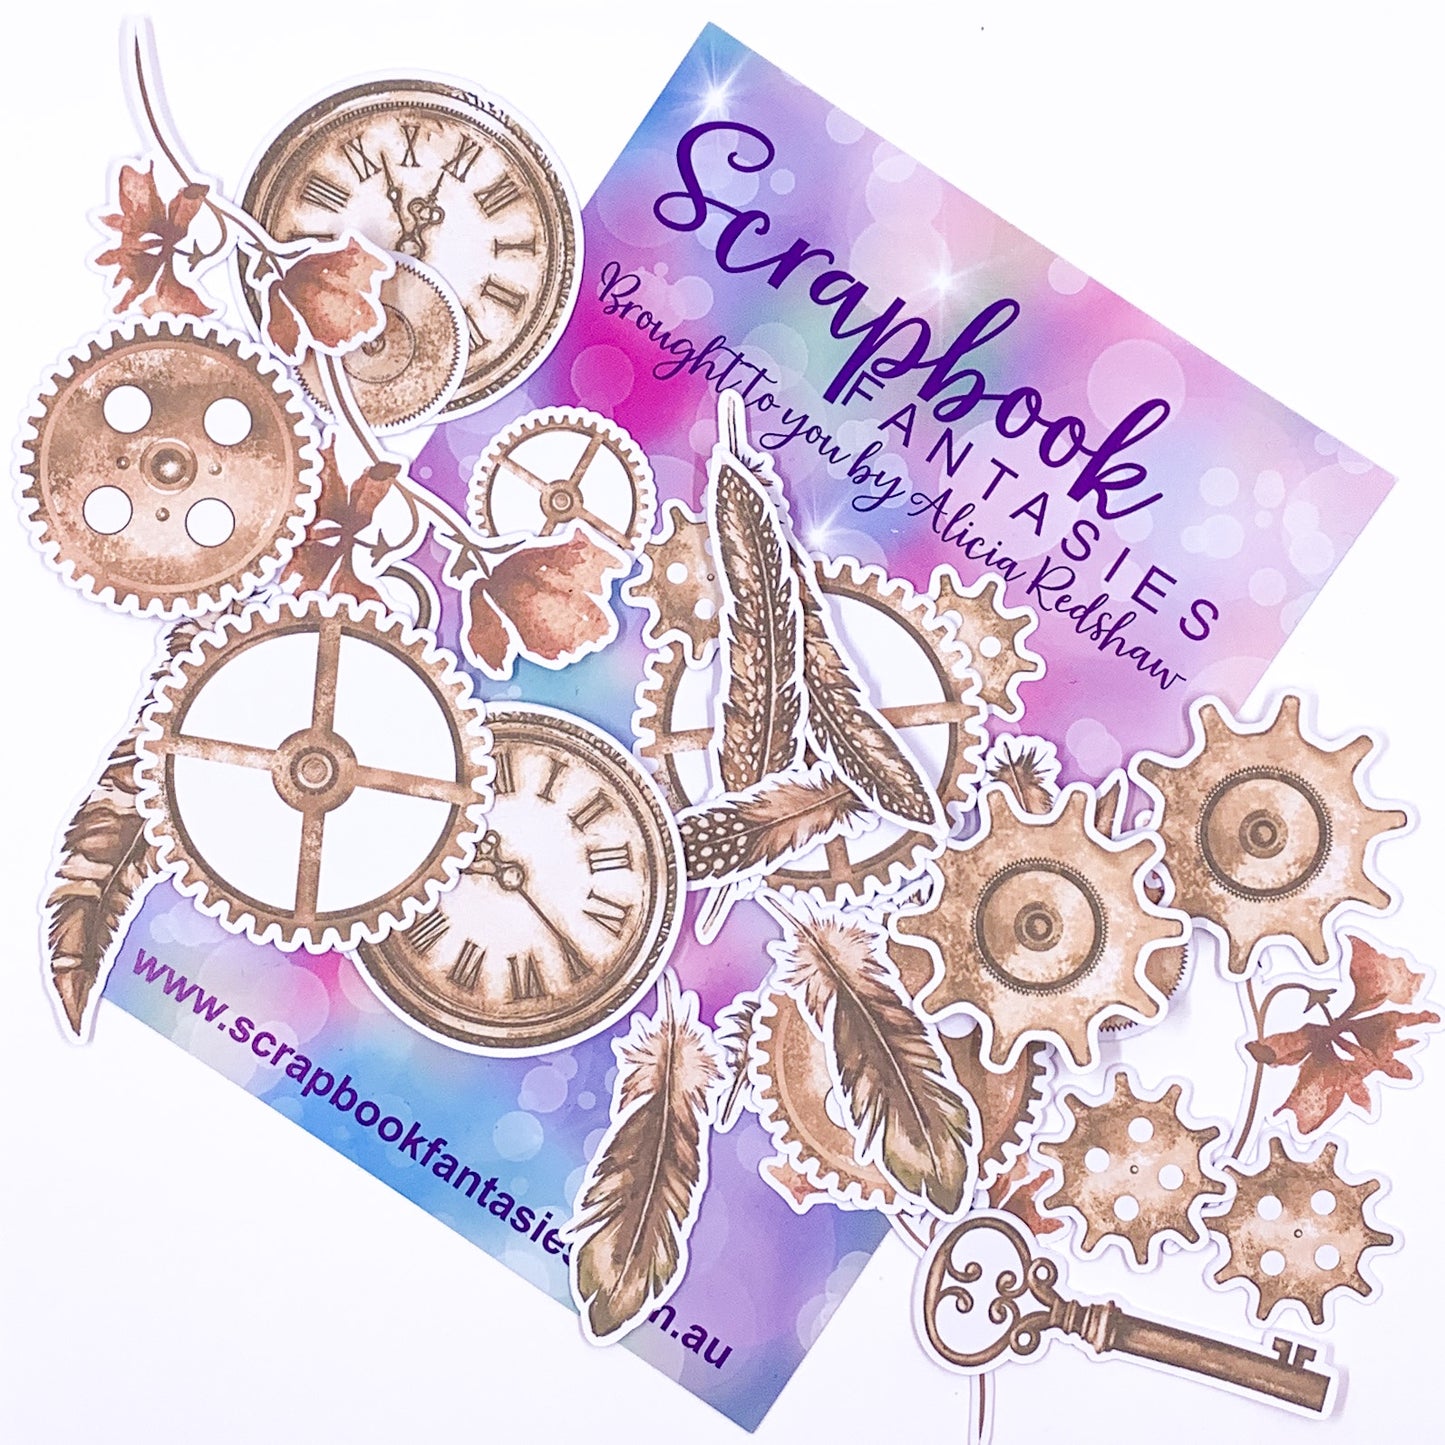 Colour-Cuts - Steampunk & Feathers 20 (28 pieces) Designed by Alicia Redshaw